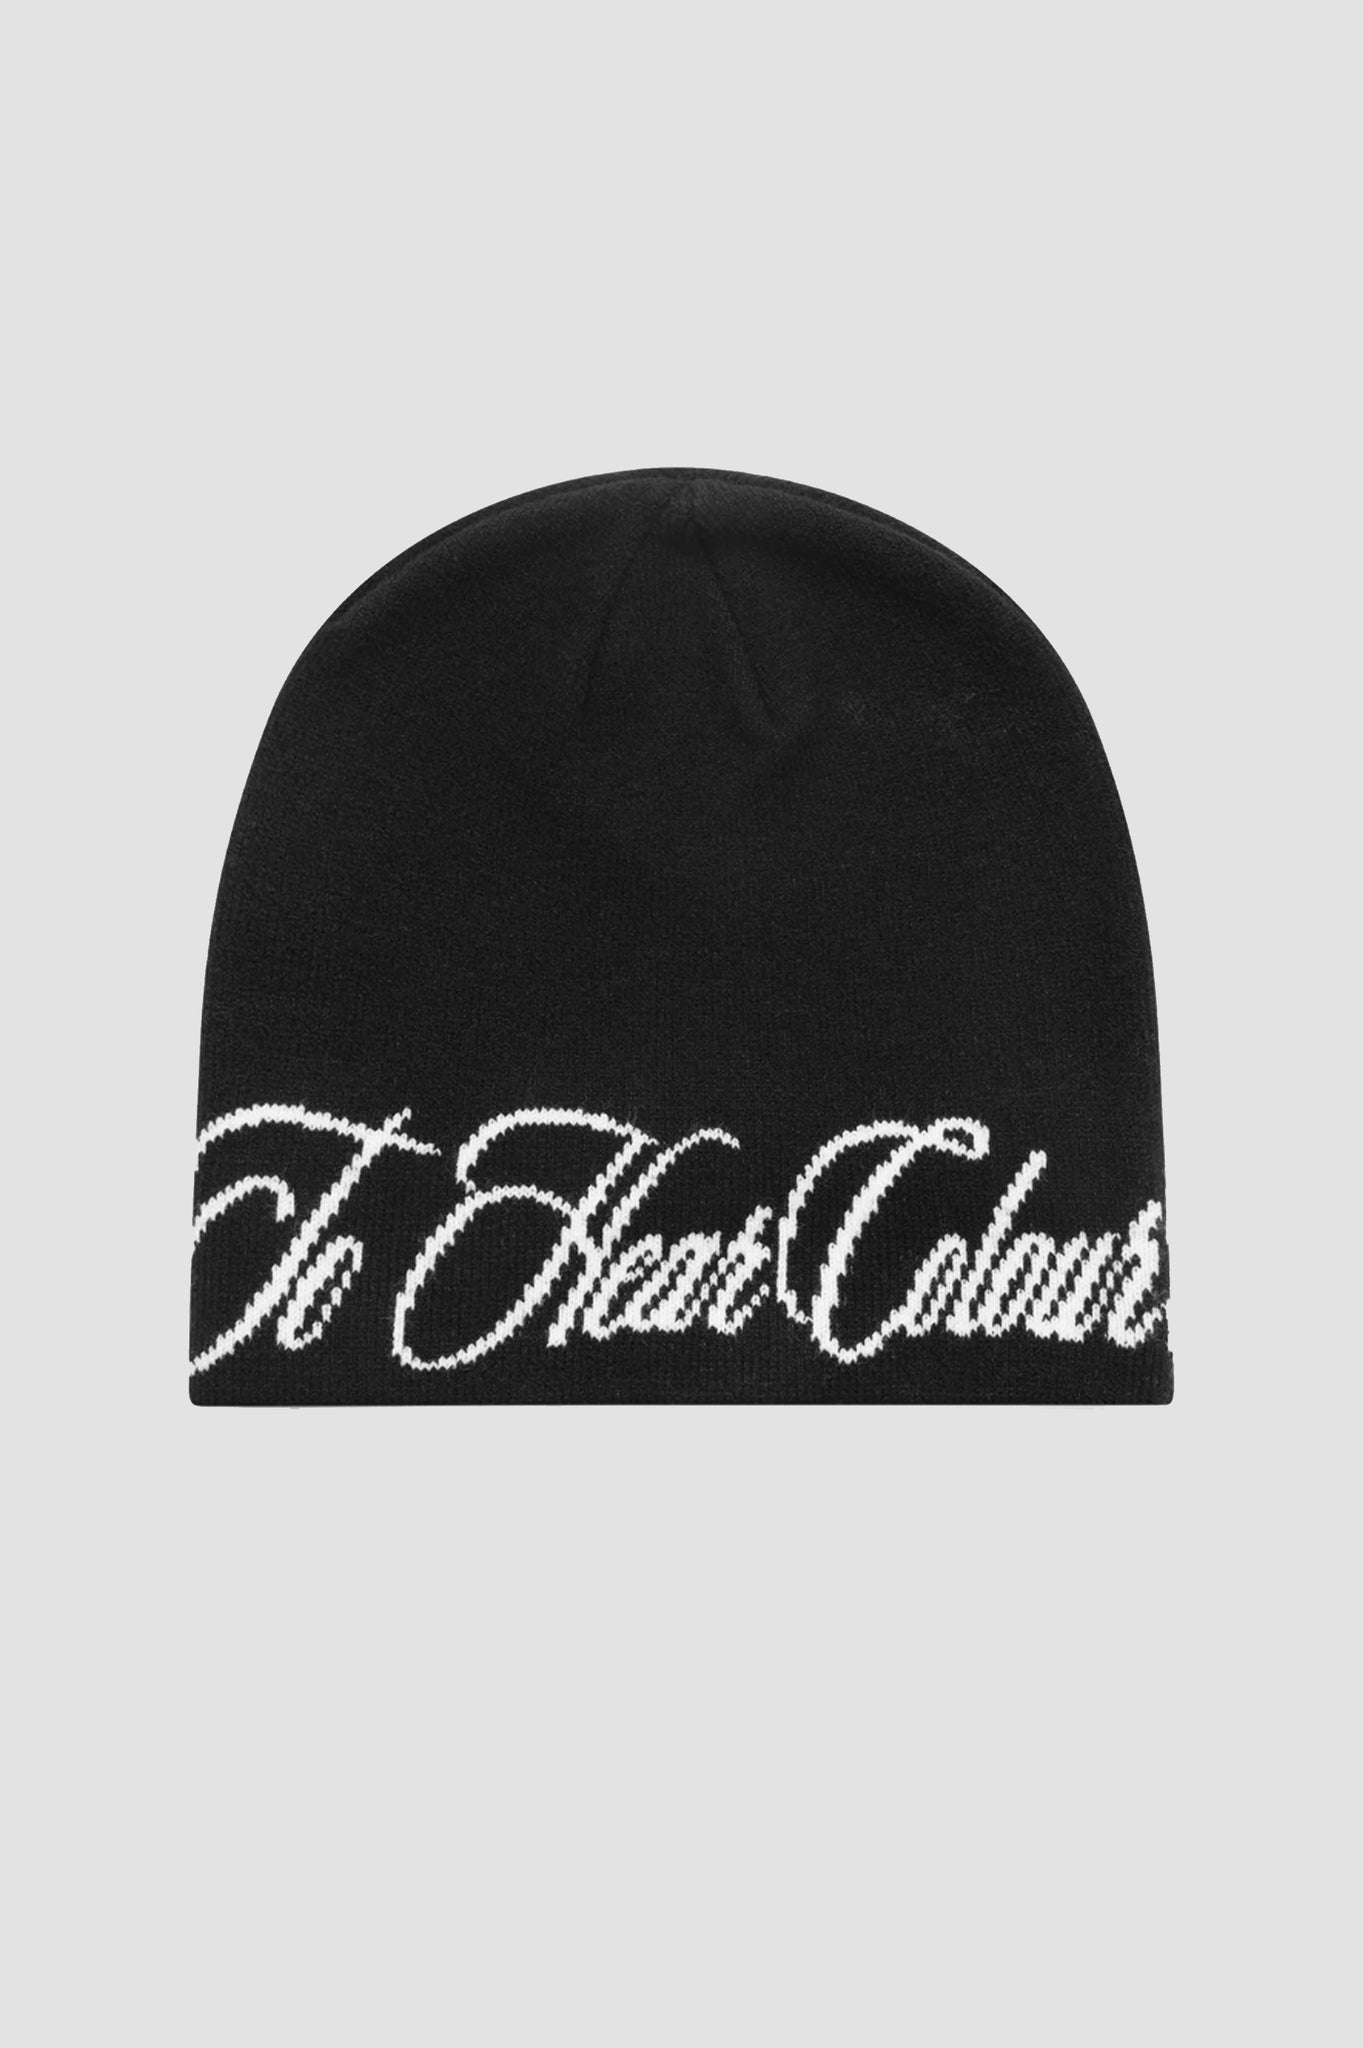 To Hear Colour 'Melding Thoughts' Skull Beanie